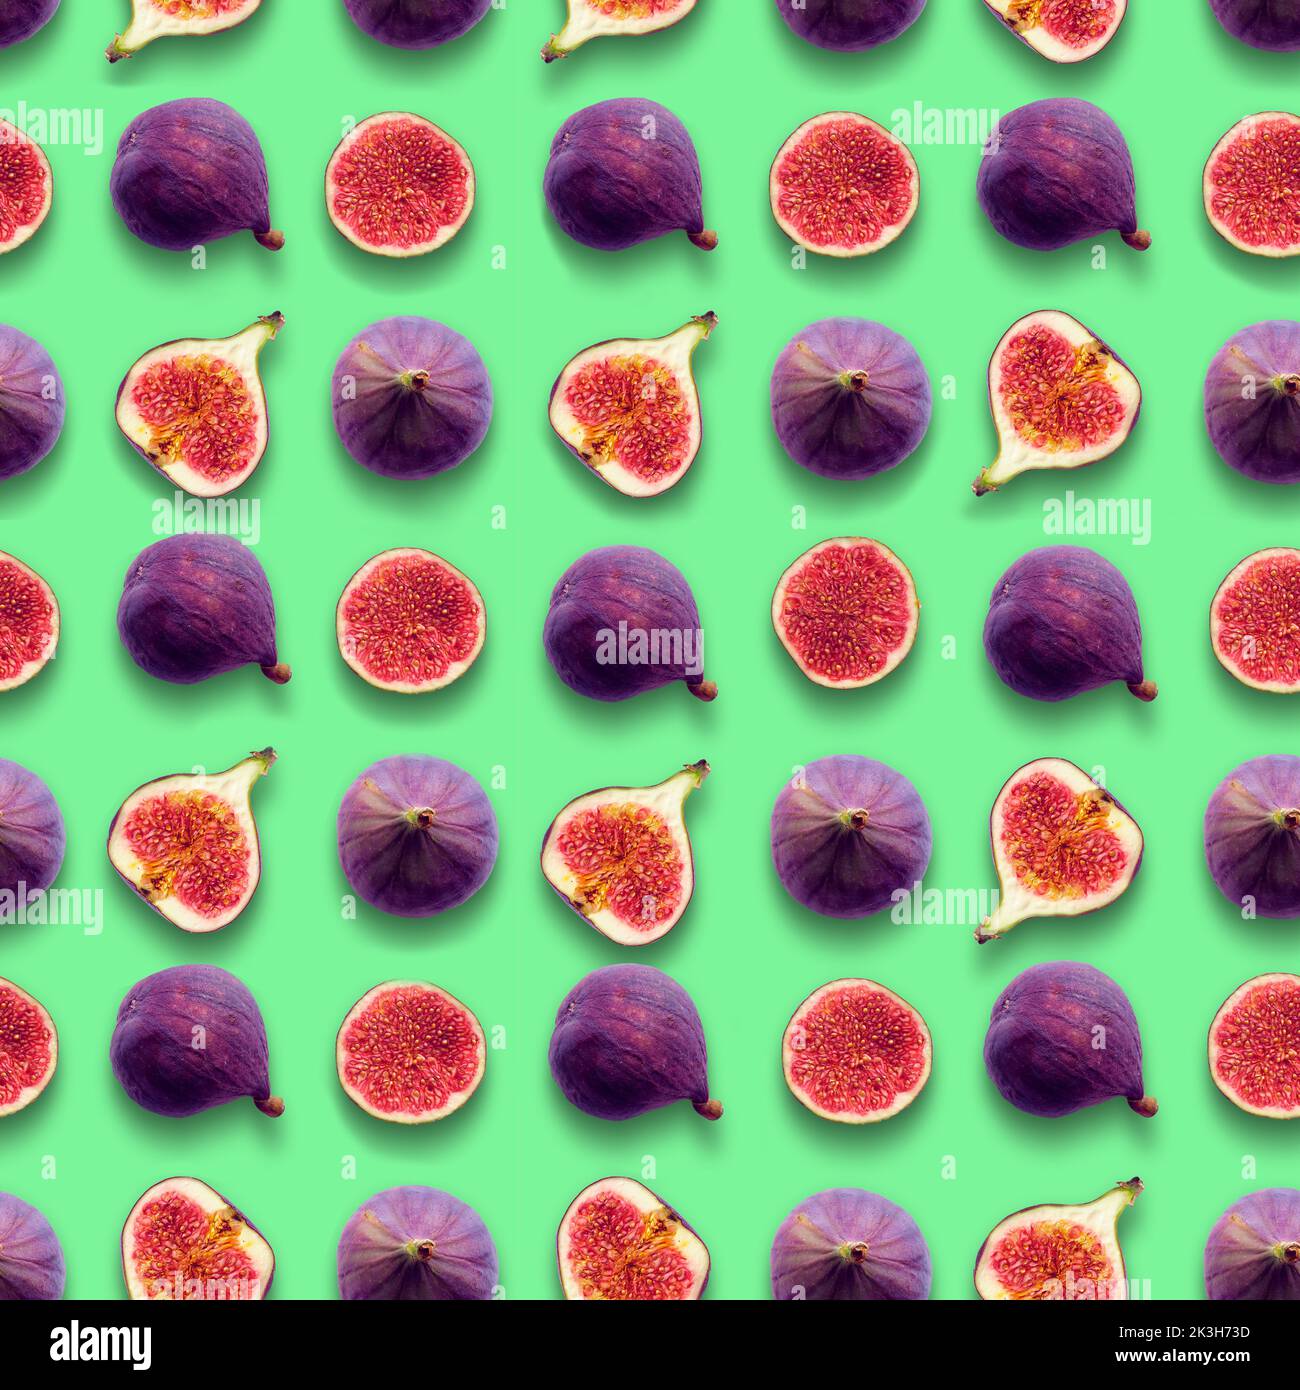 Fig fruits, whole and cut in half, seamless grid pattern on mint green color background. Stock Photo